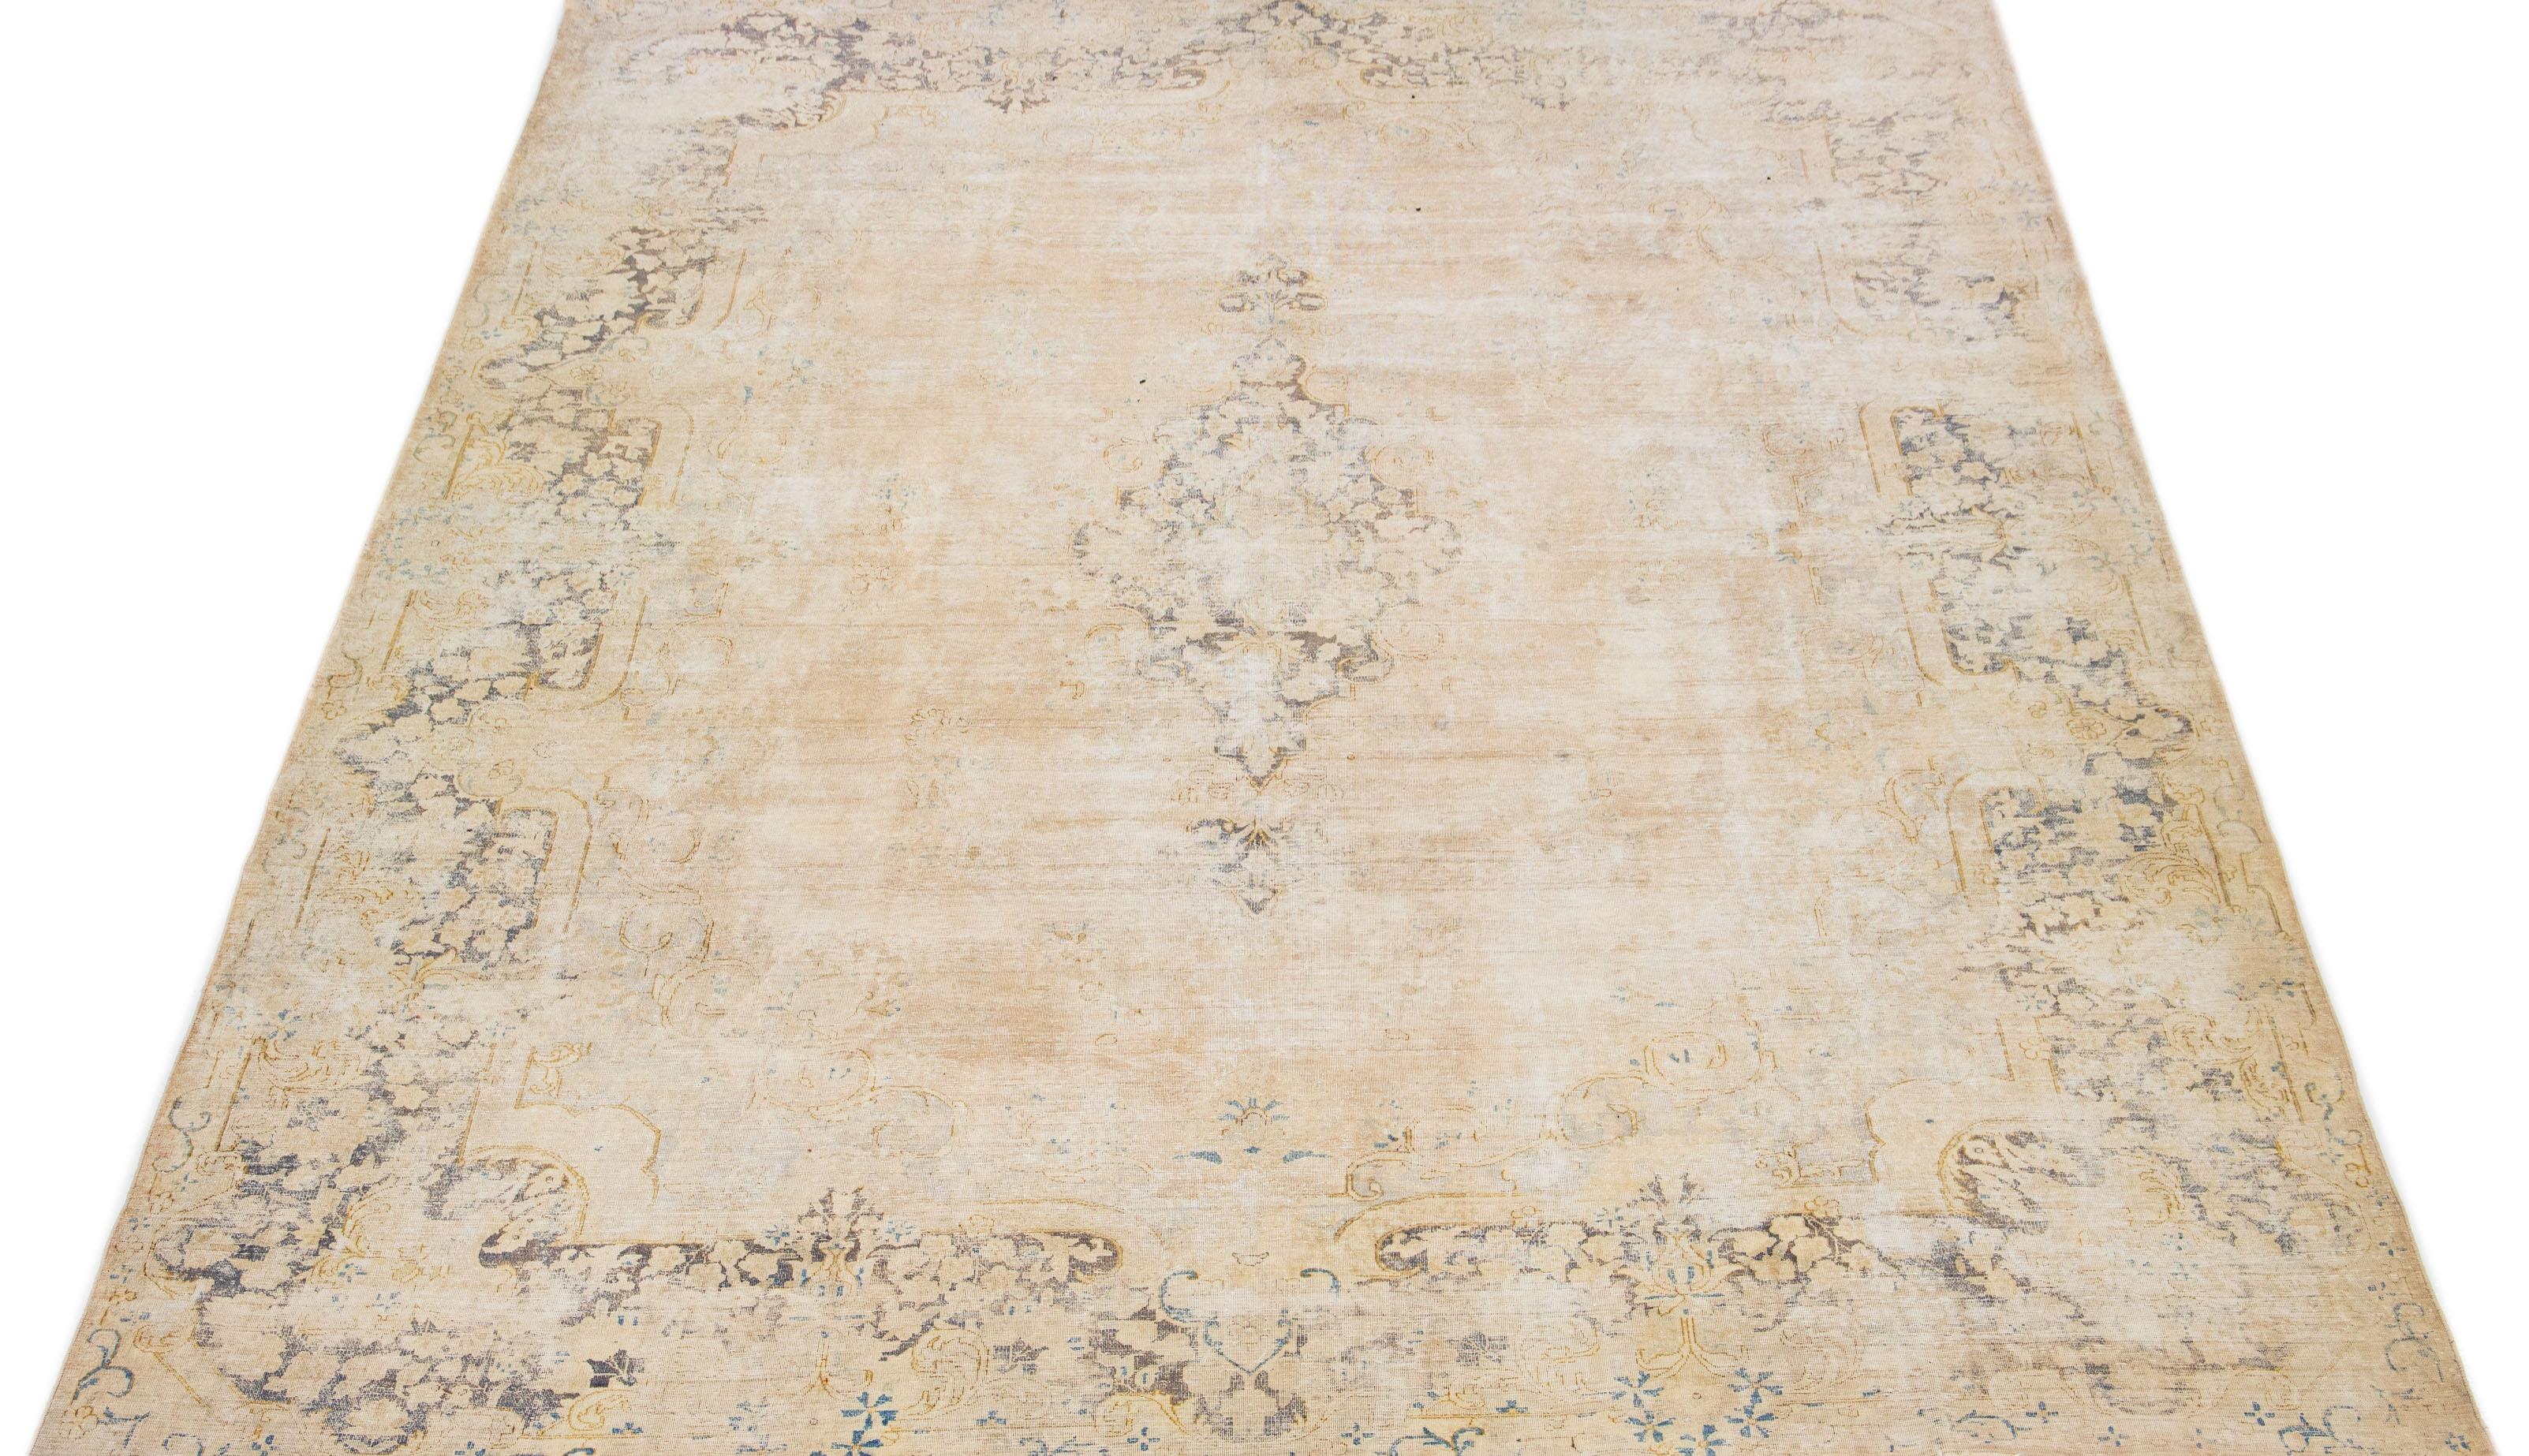 Beautiful antique Kerman hand-knotted wool rug with a beige field. This Persian rug has gray accents in a gorgeous medallion floral pattern.

This rug measures 9'8